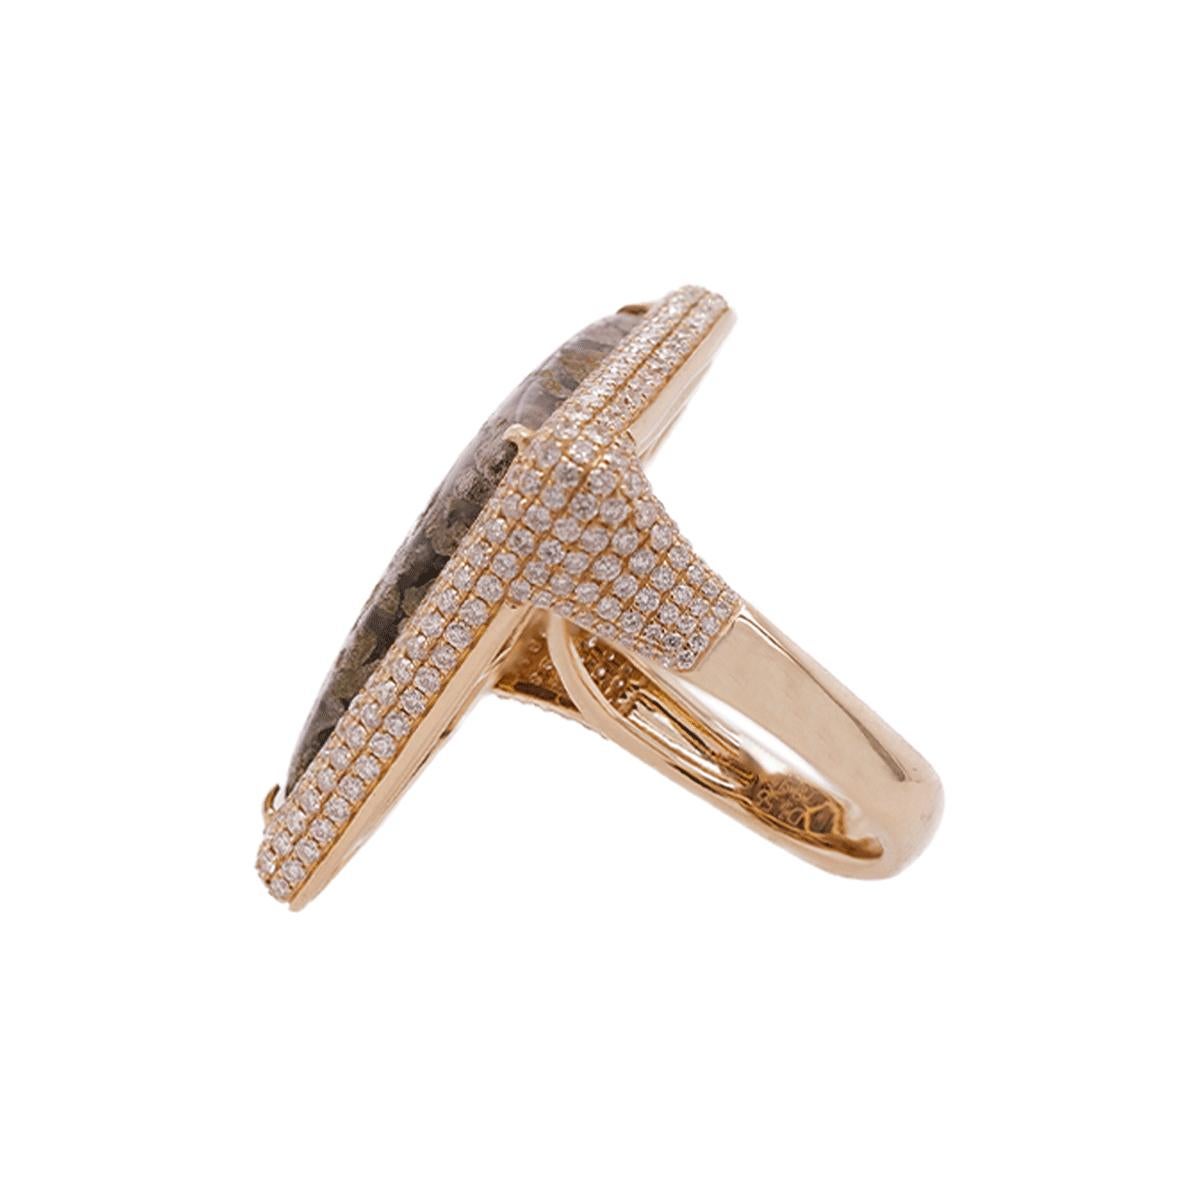 Handcrafted in 14k solid yellow gold, Porter Lyons' one of a kind ring features a kite shaped pyritized dinosaur bone, encrusted with over 300 pavé diamonds. 

30mm x 18mm (Approx.)

7.9GMS Solid 14K Yellow Gold, 3GMS Dinosaur Bone and 1.55CT